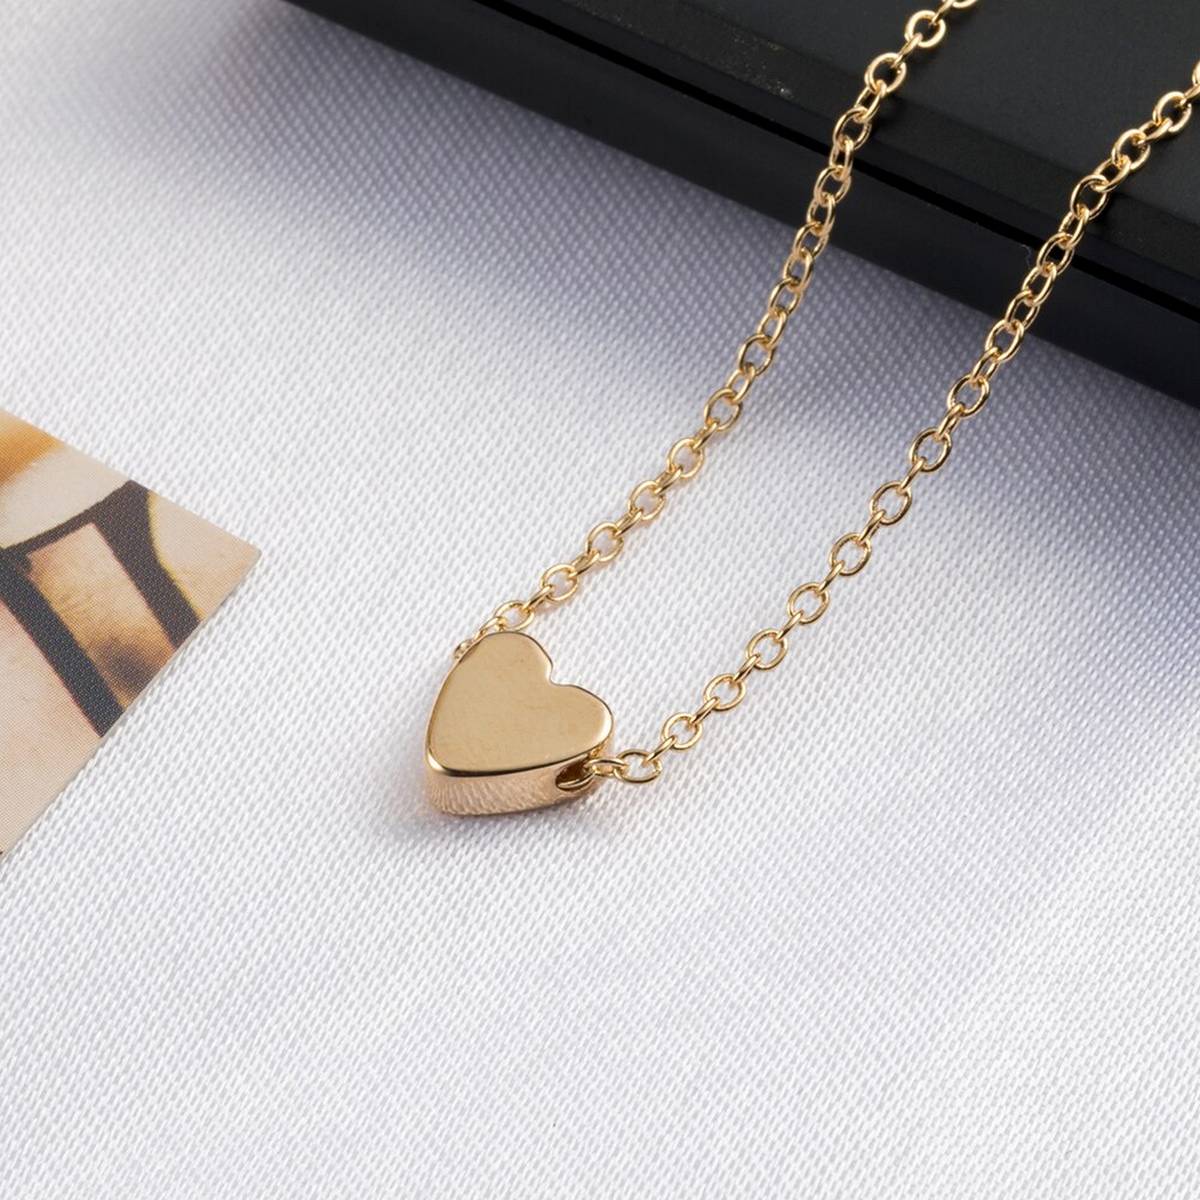 WangGao Stainless Steel Heart Pendant Necklace for Women Love Charms Chain  Jewelry for Girls